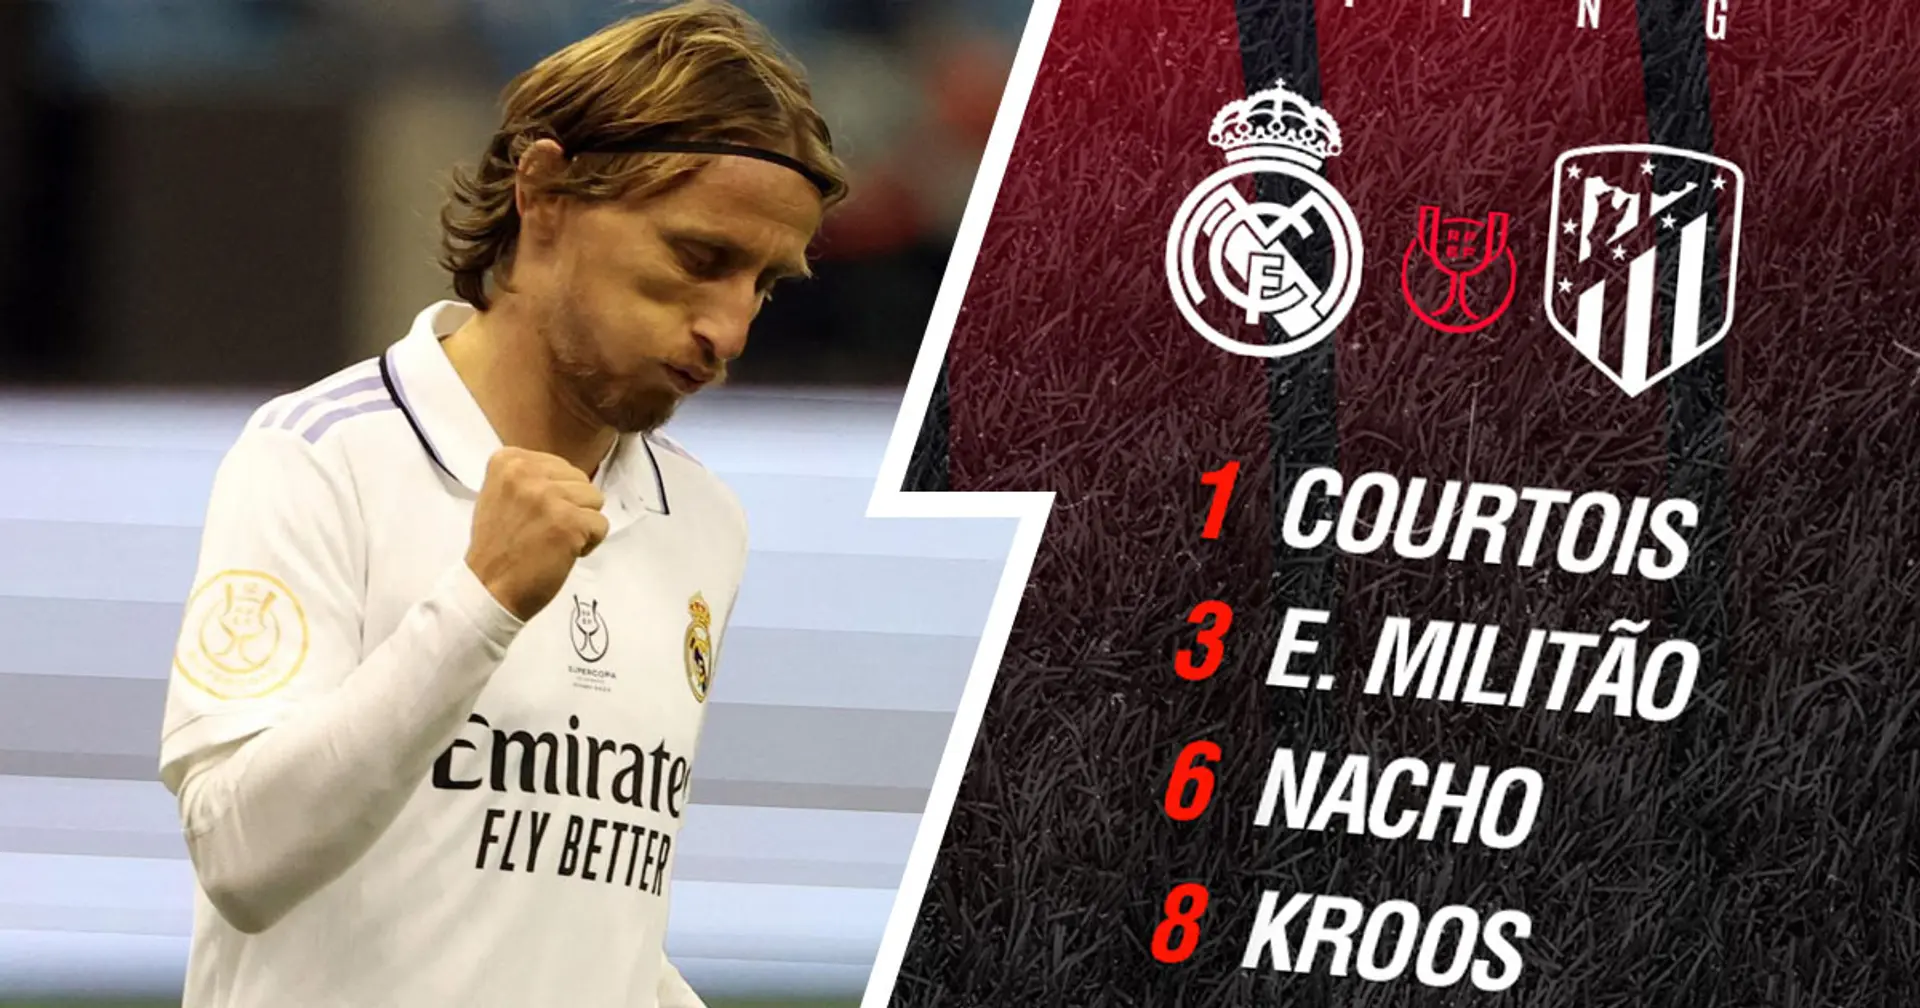 OFFICIAL: Real Madrid XI v Atletico Madrid unveiled